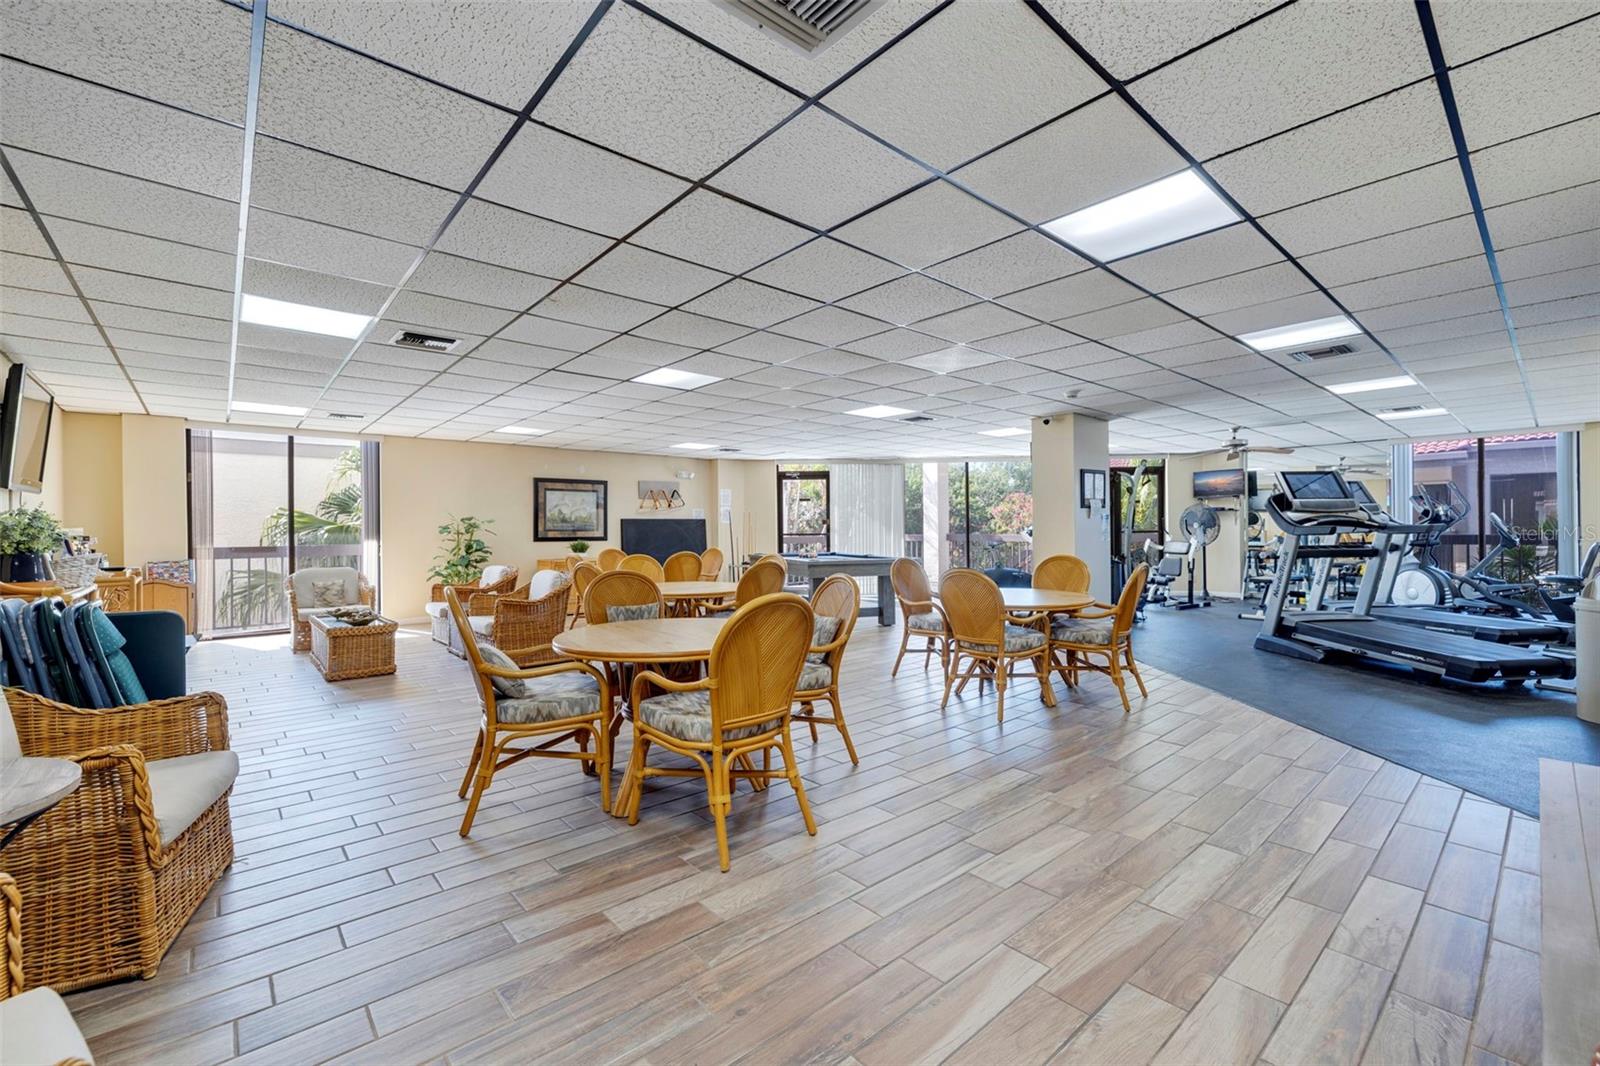 SOCIAL/RECREATION VIEW WITH POOL TABLE AND FITNESS AREA